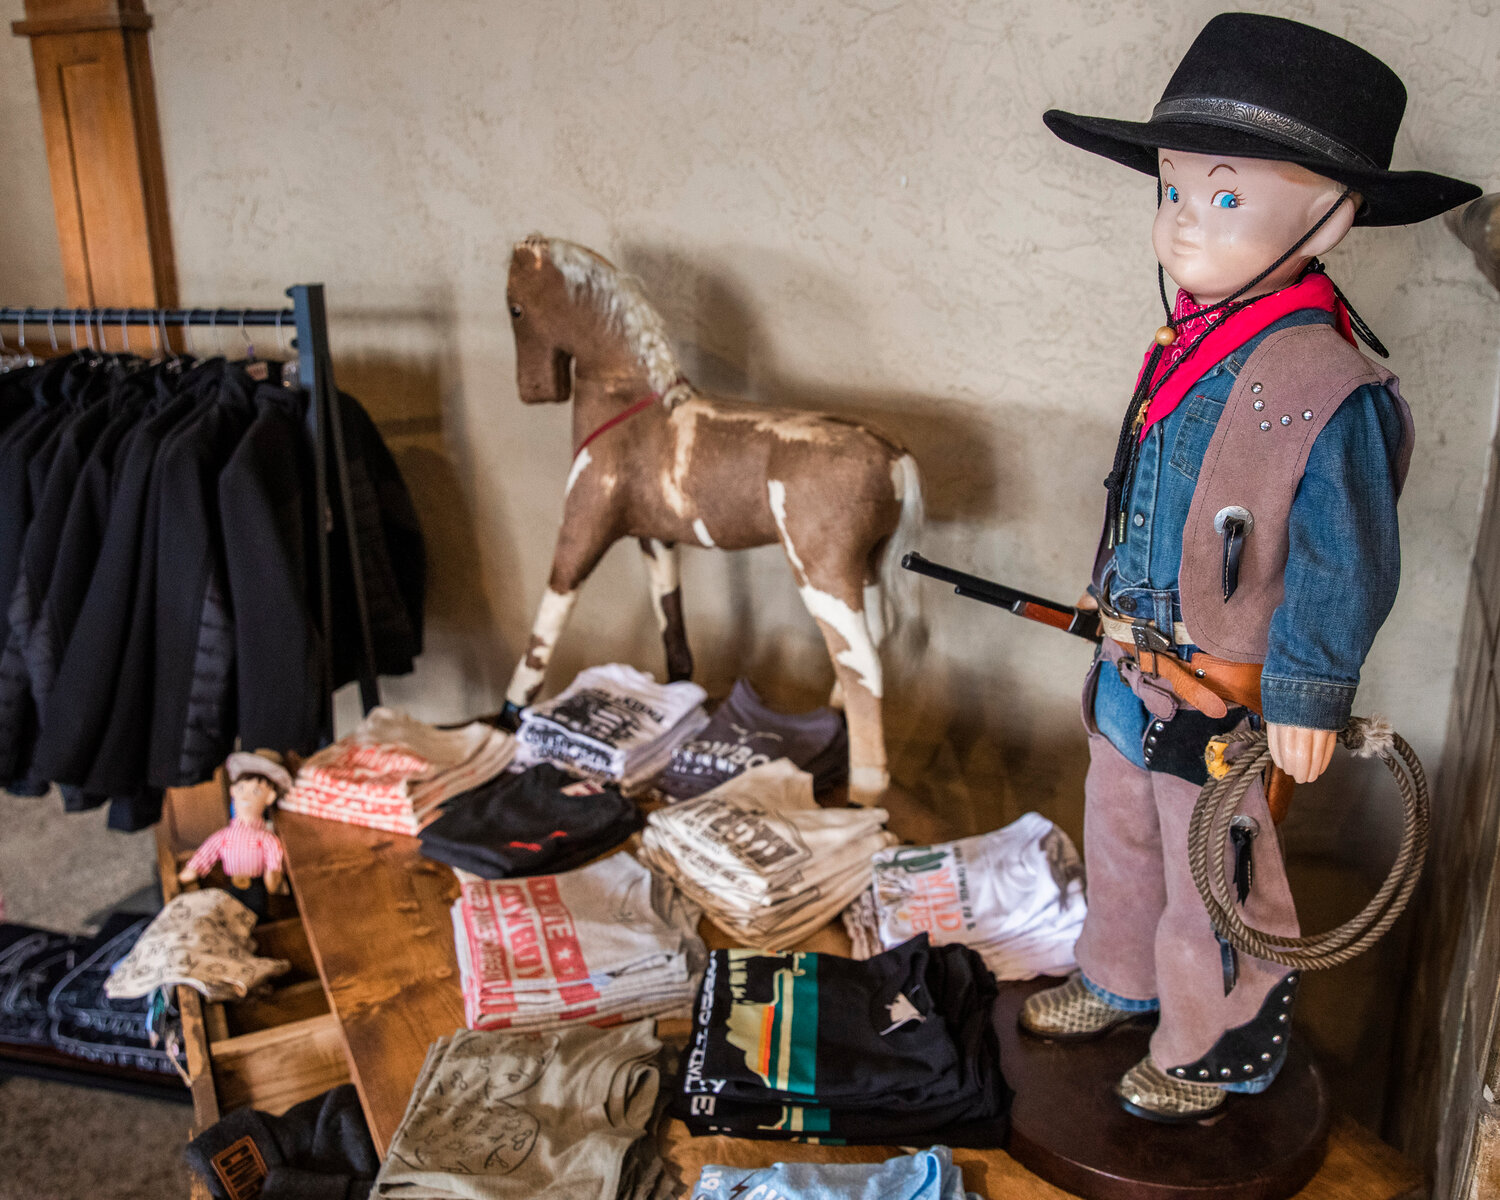 Kids clothing and western displays are seen inside Saddle Bum on Monday, May 8, in downtown Centralia.